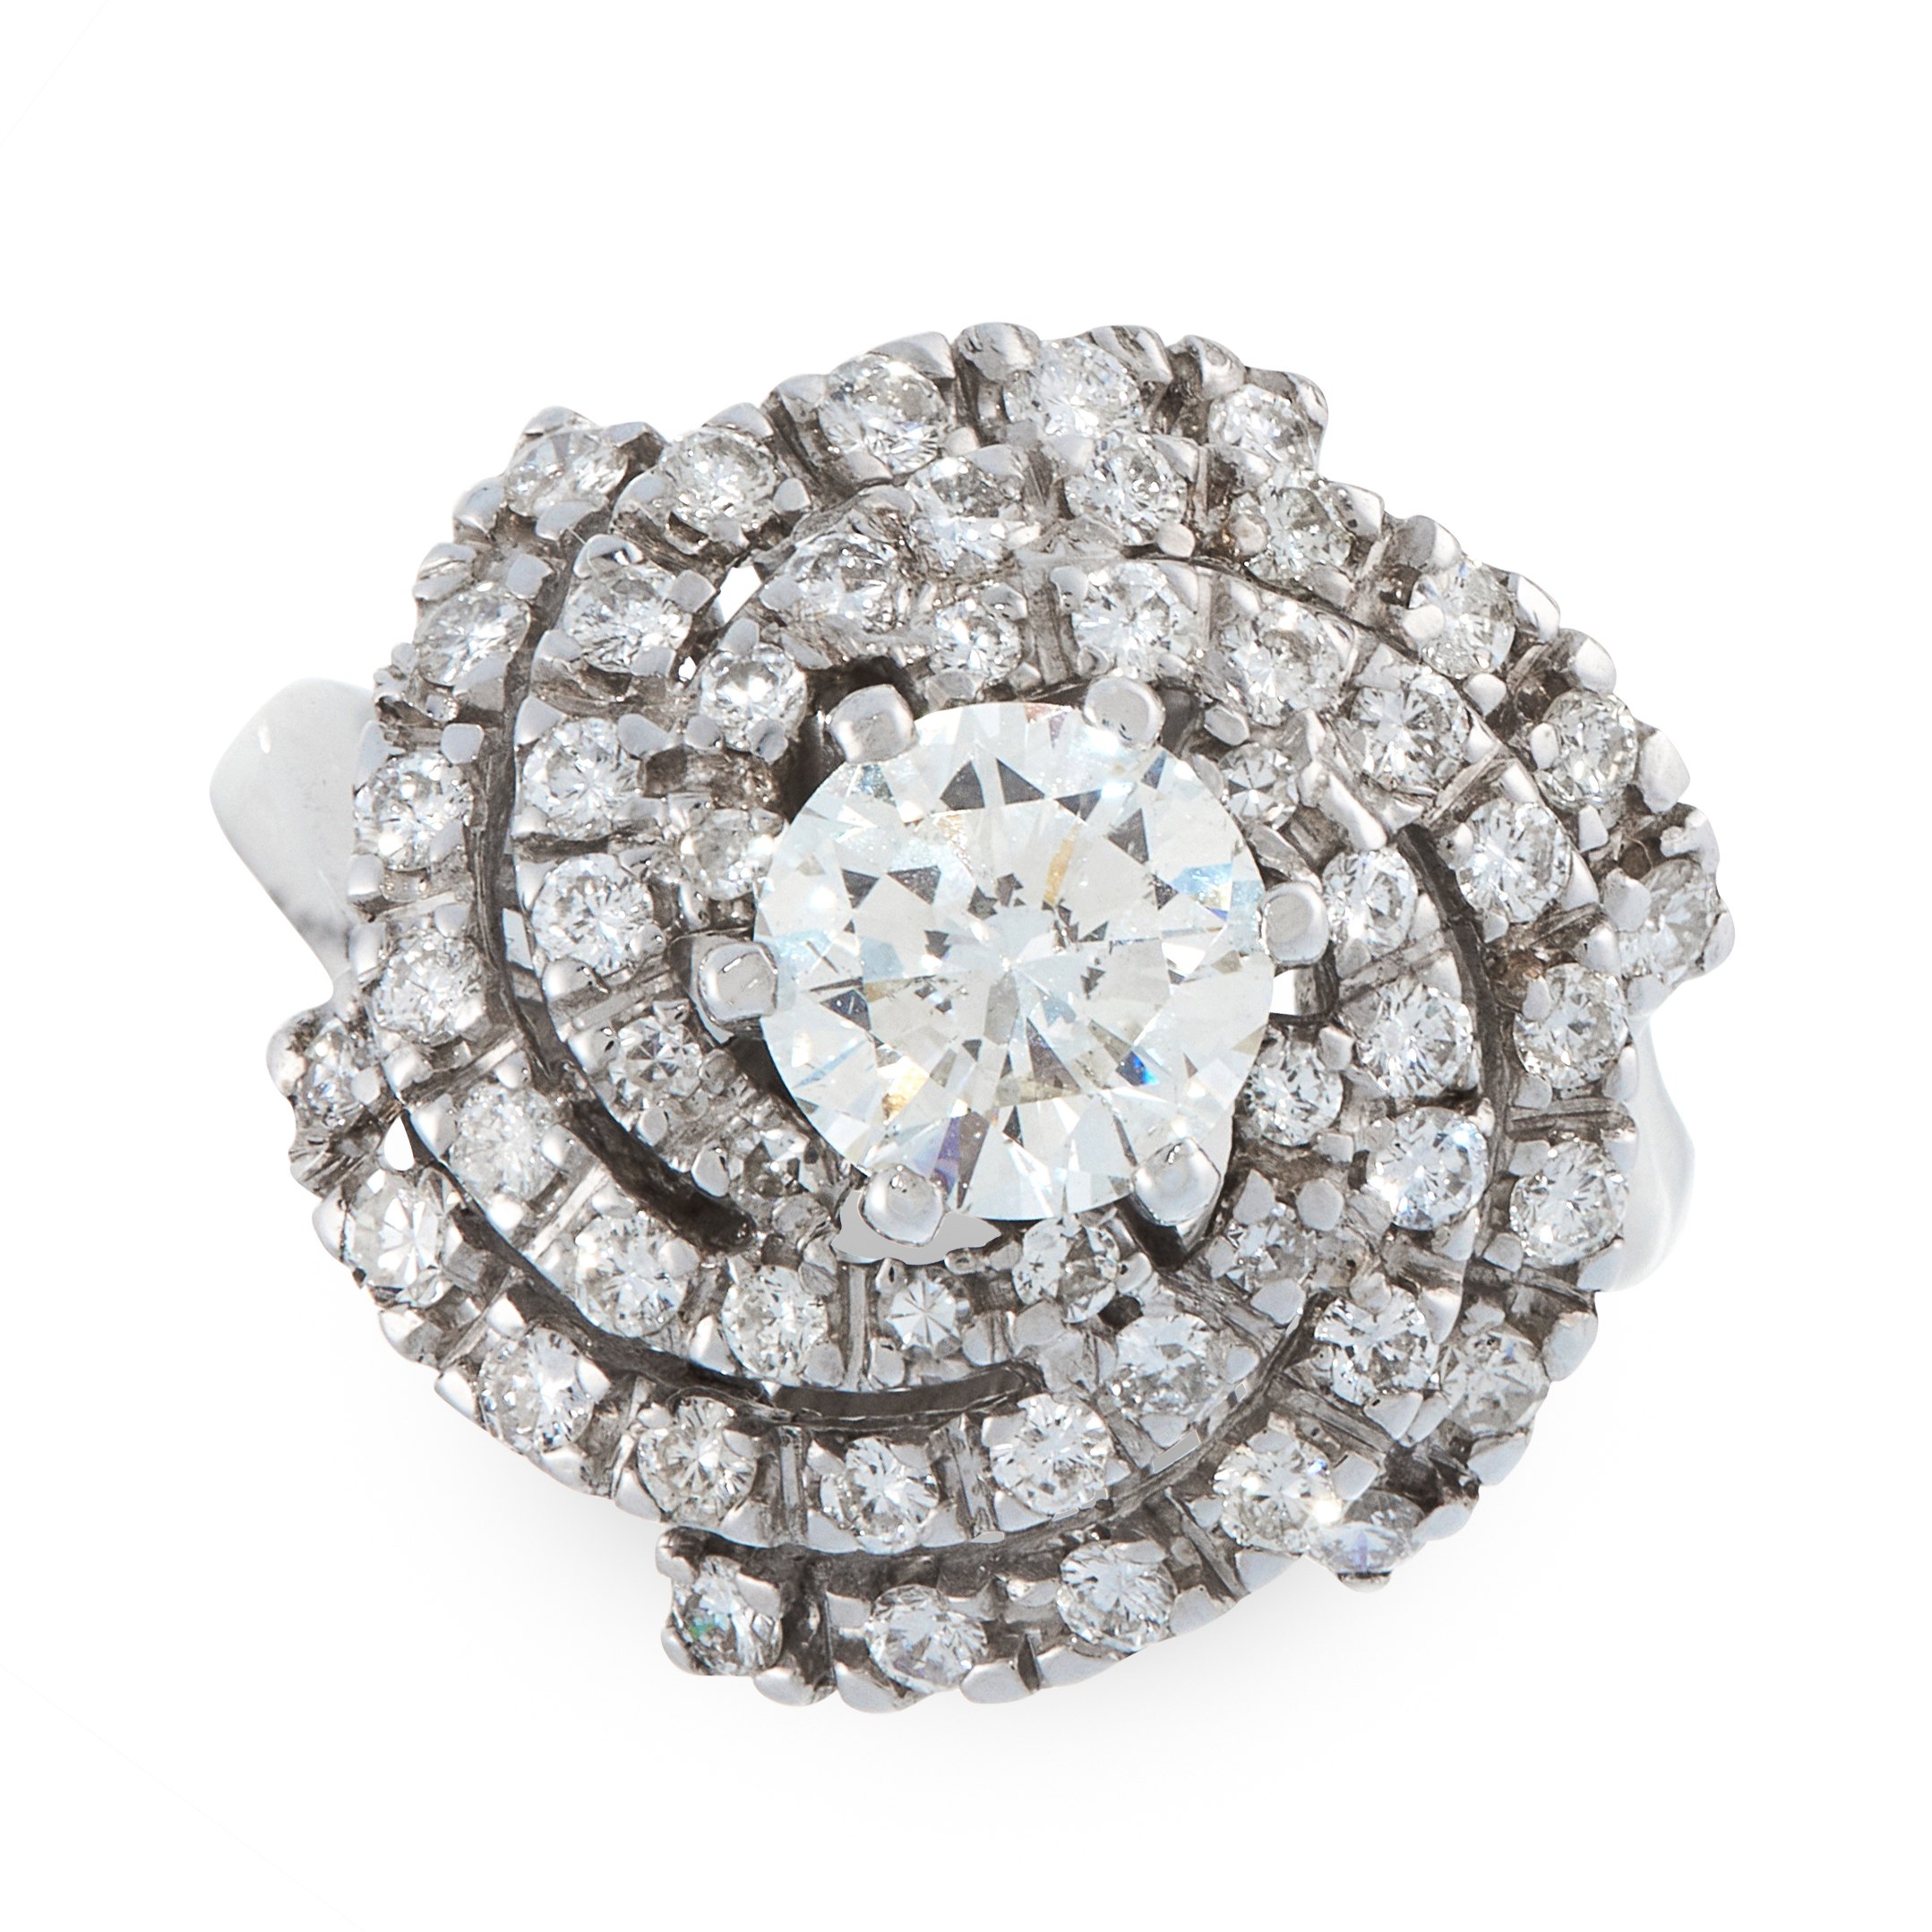 A DIAMOND DRESS RING in 18ct white gold, set with a central round cut diamond of 1.08 carats in a